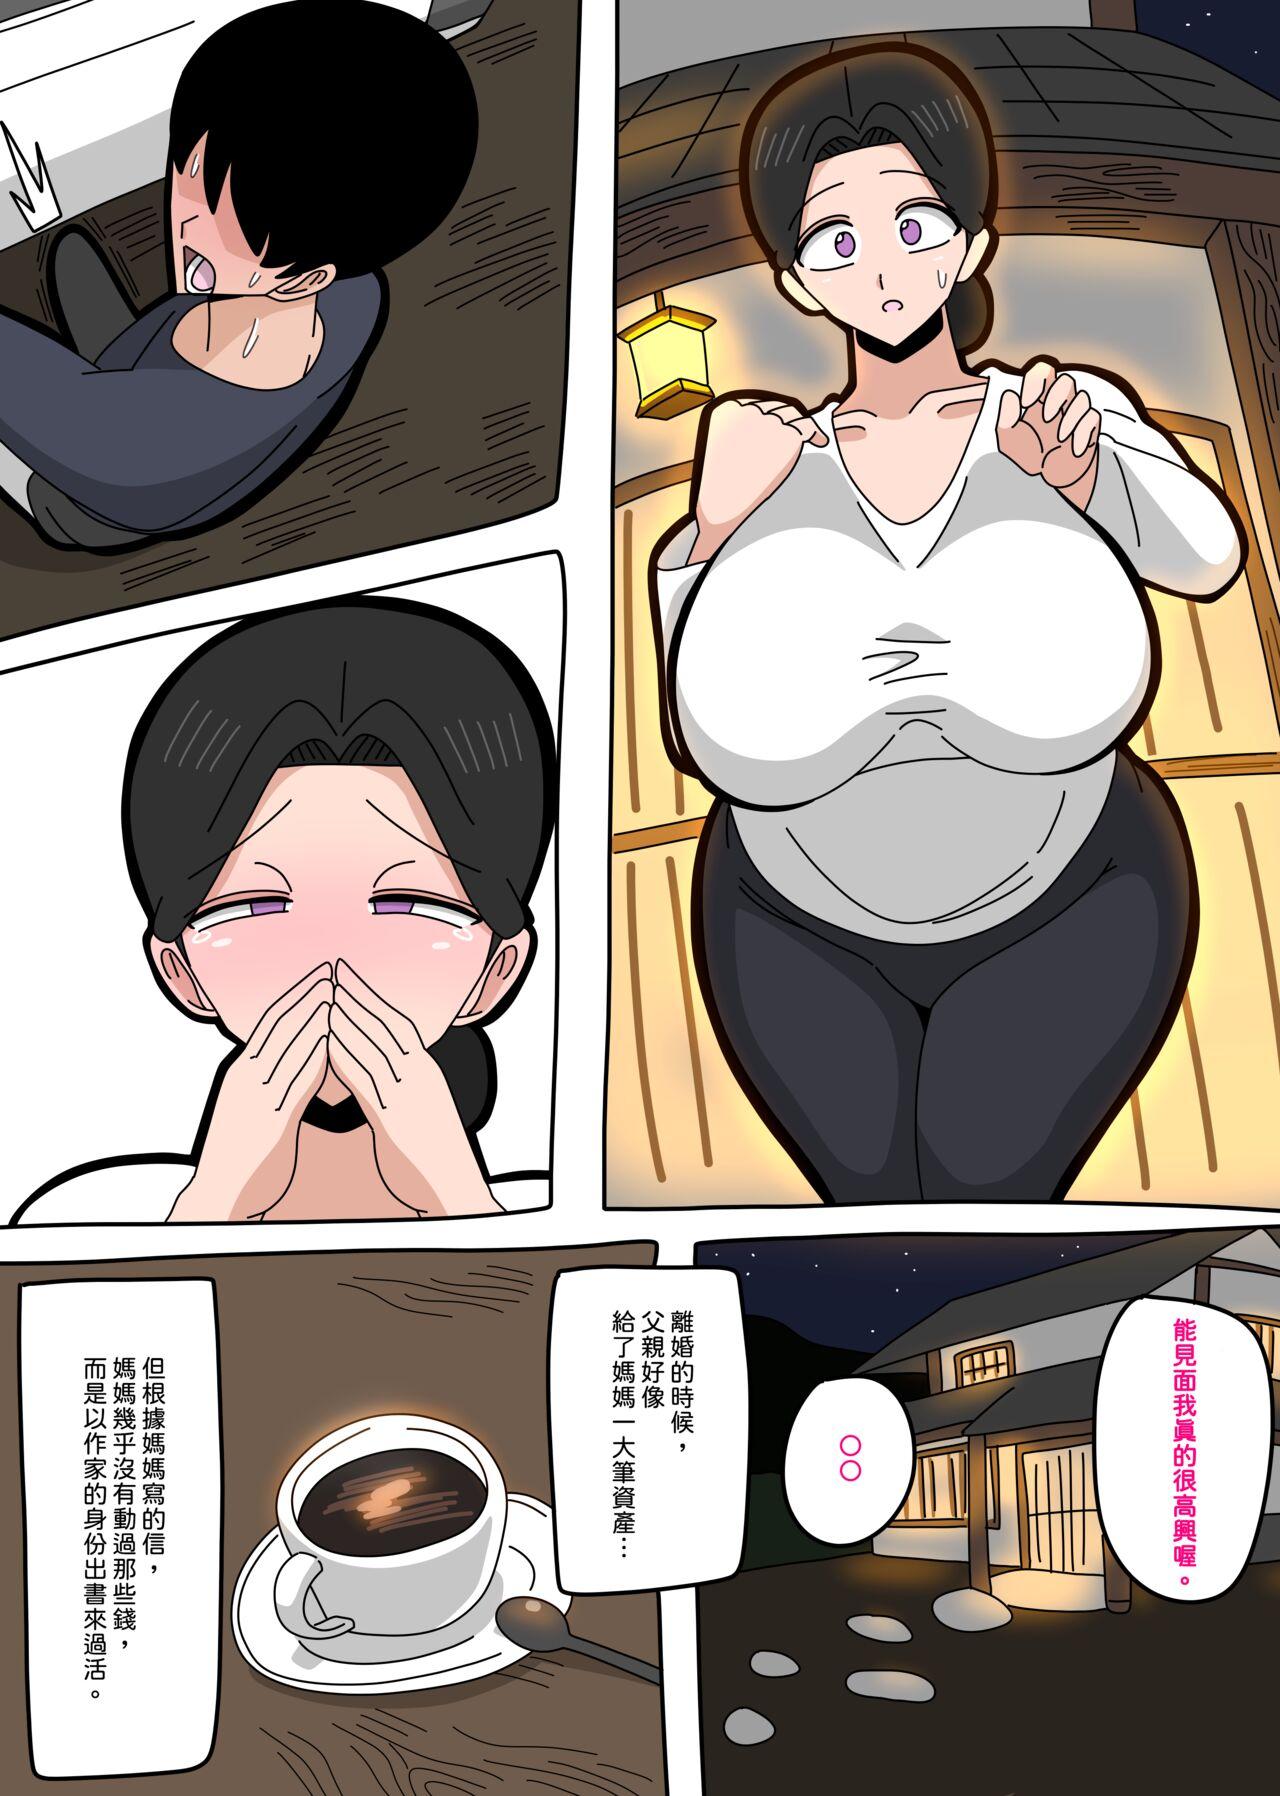 Pendeja [18master] 2023-5-24 Meeting mom again after a long separation | 與媽媽重逢… [Chinese][興趣使然的個人機翻] - Original Lezdom - Picture 2